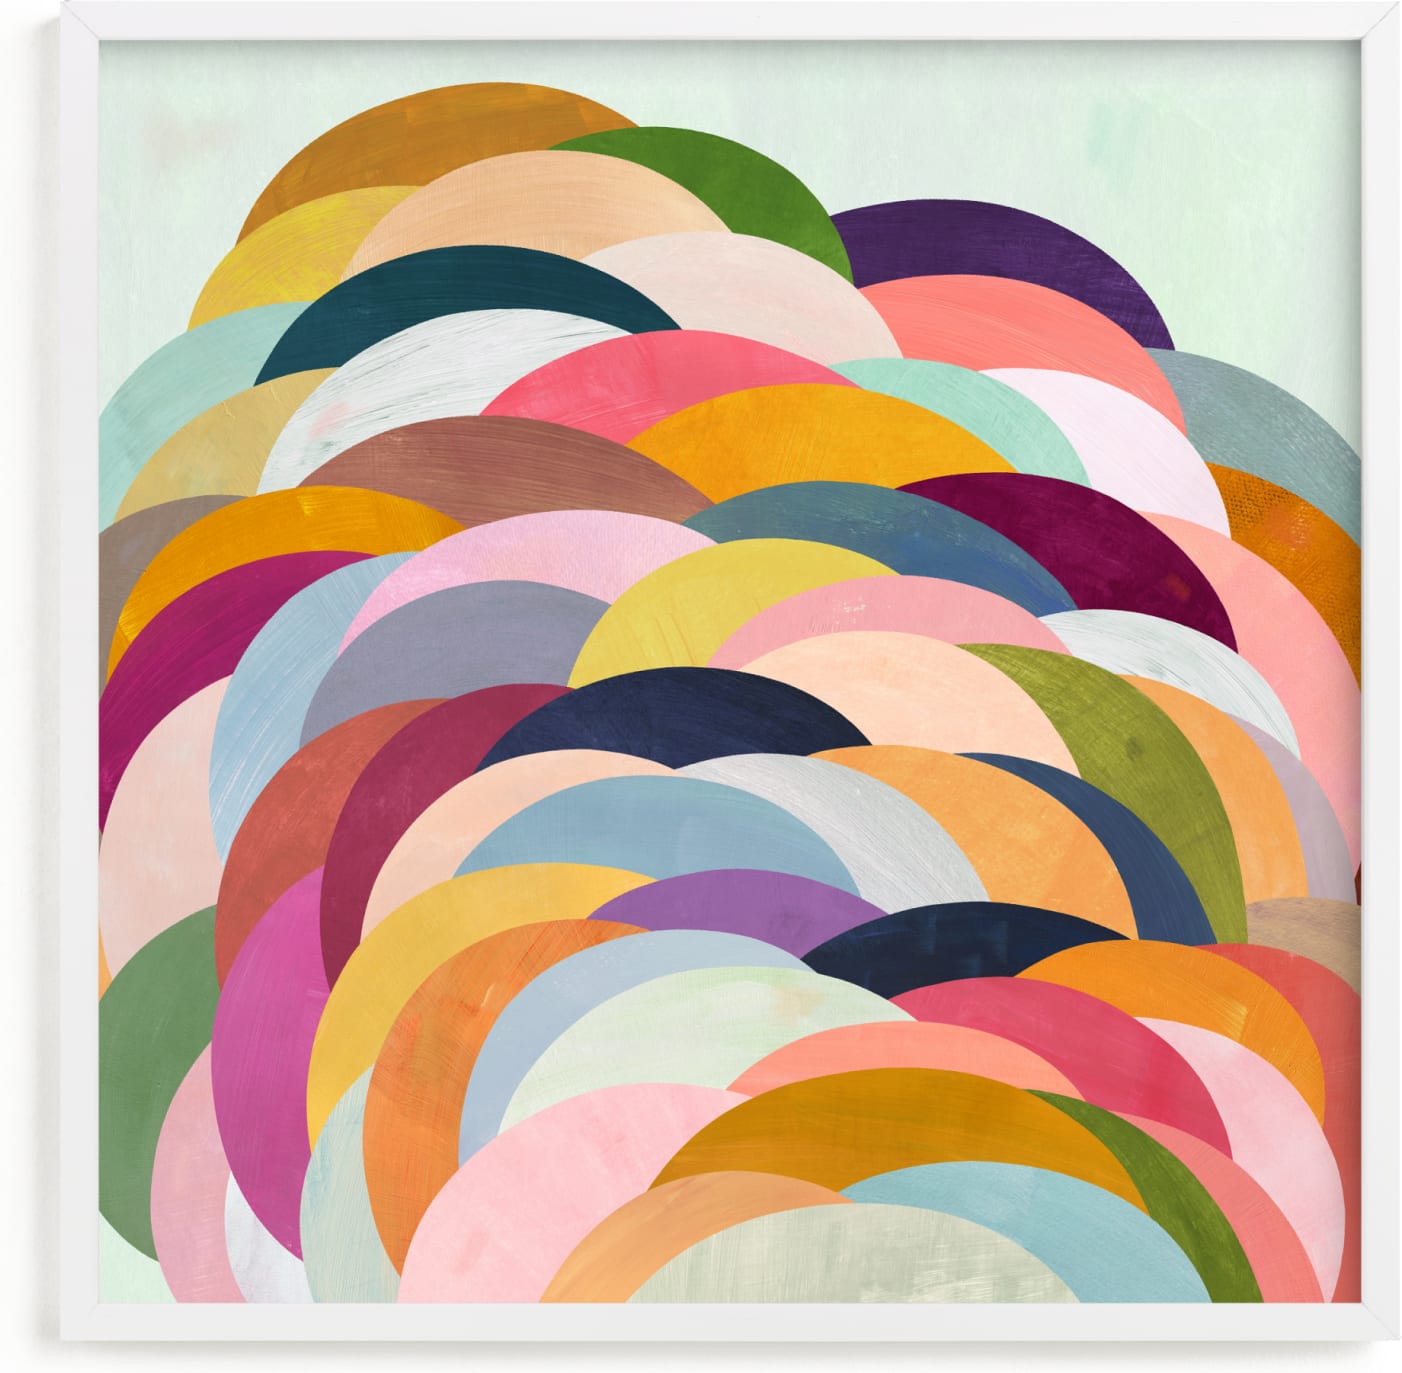 This is a colorful art by melanie mikecz called Discus.